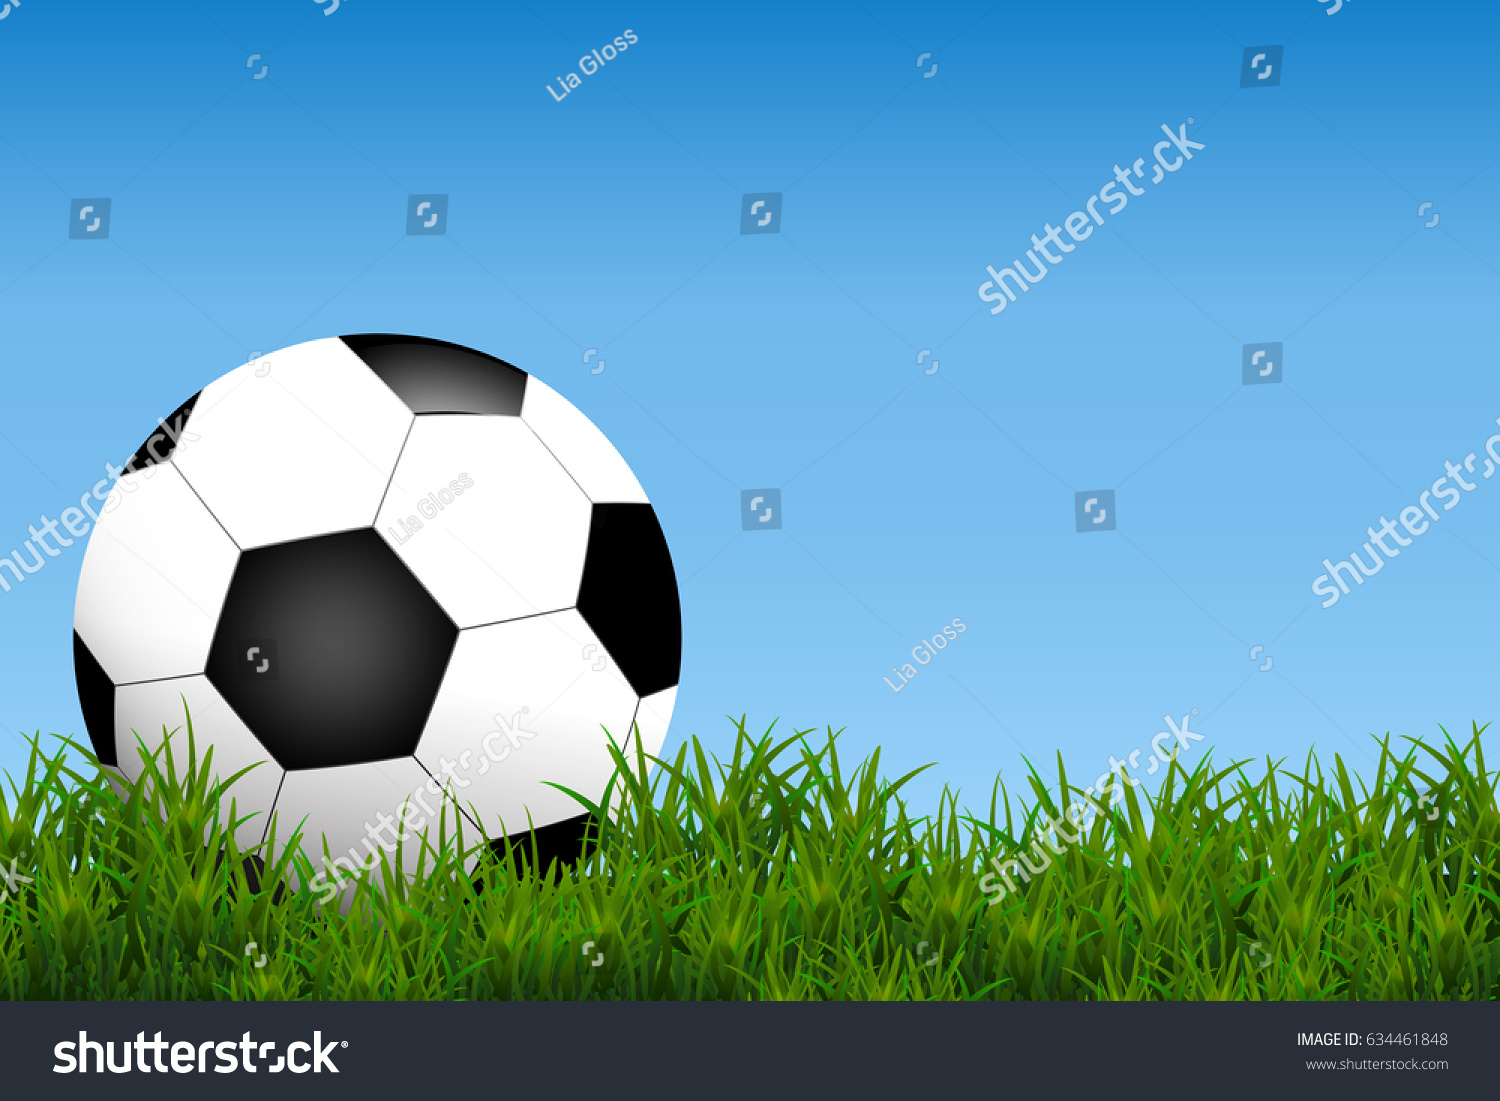 Football Soccer Ball Isolated On Grass Stock Vector (Royalty Free ...